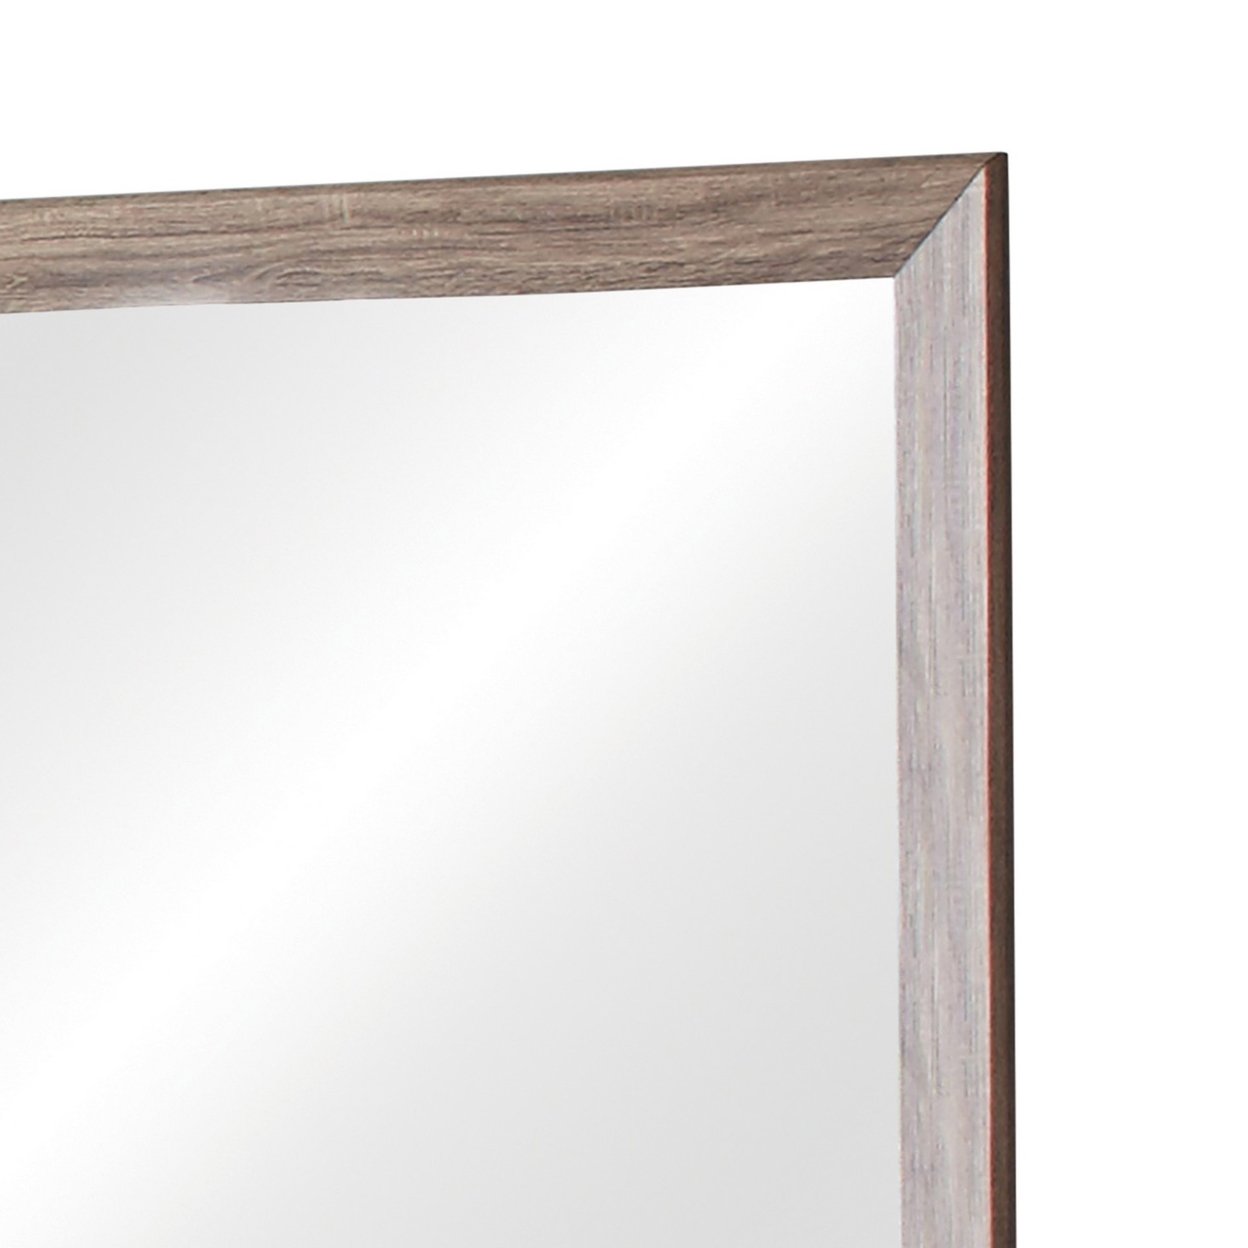 Mirror With Rectangle Wooden Frame And Washed Look, Brown- Saltoro Sherpi